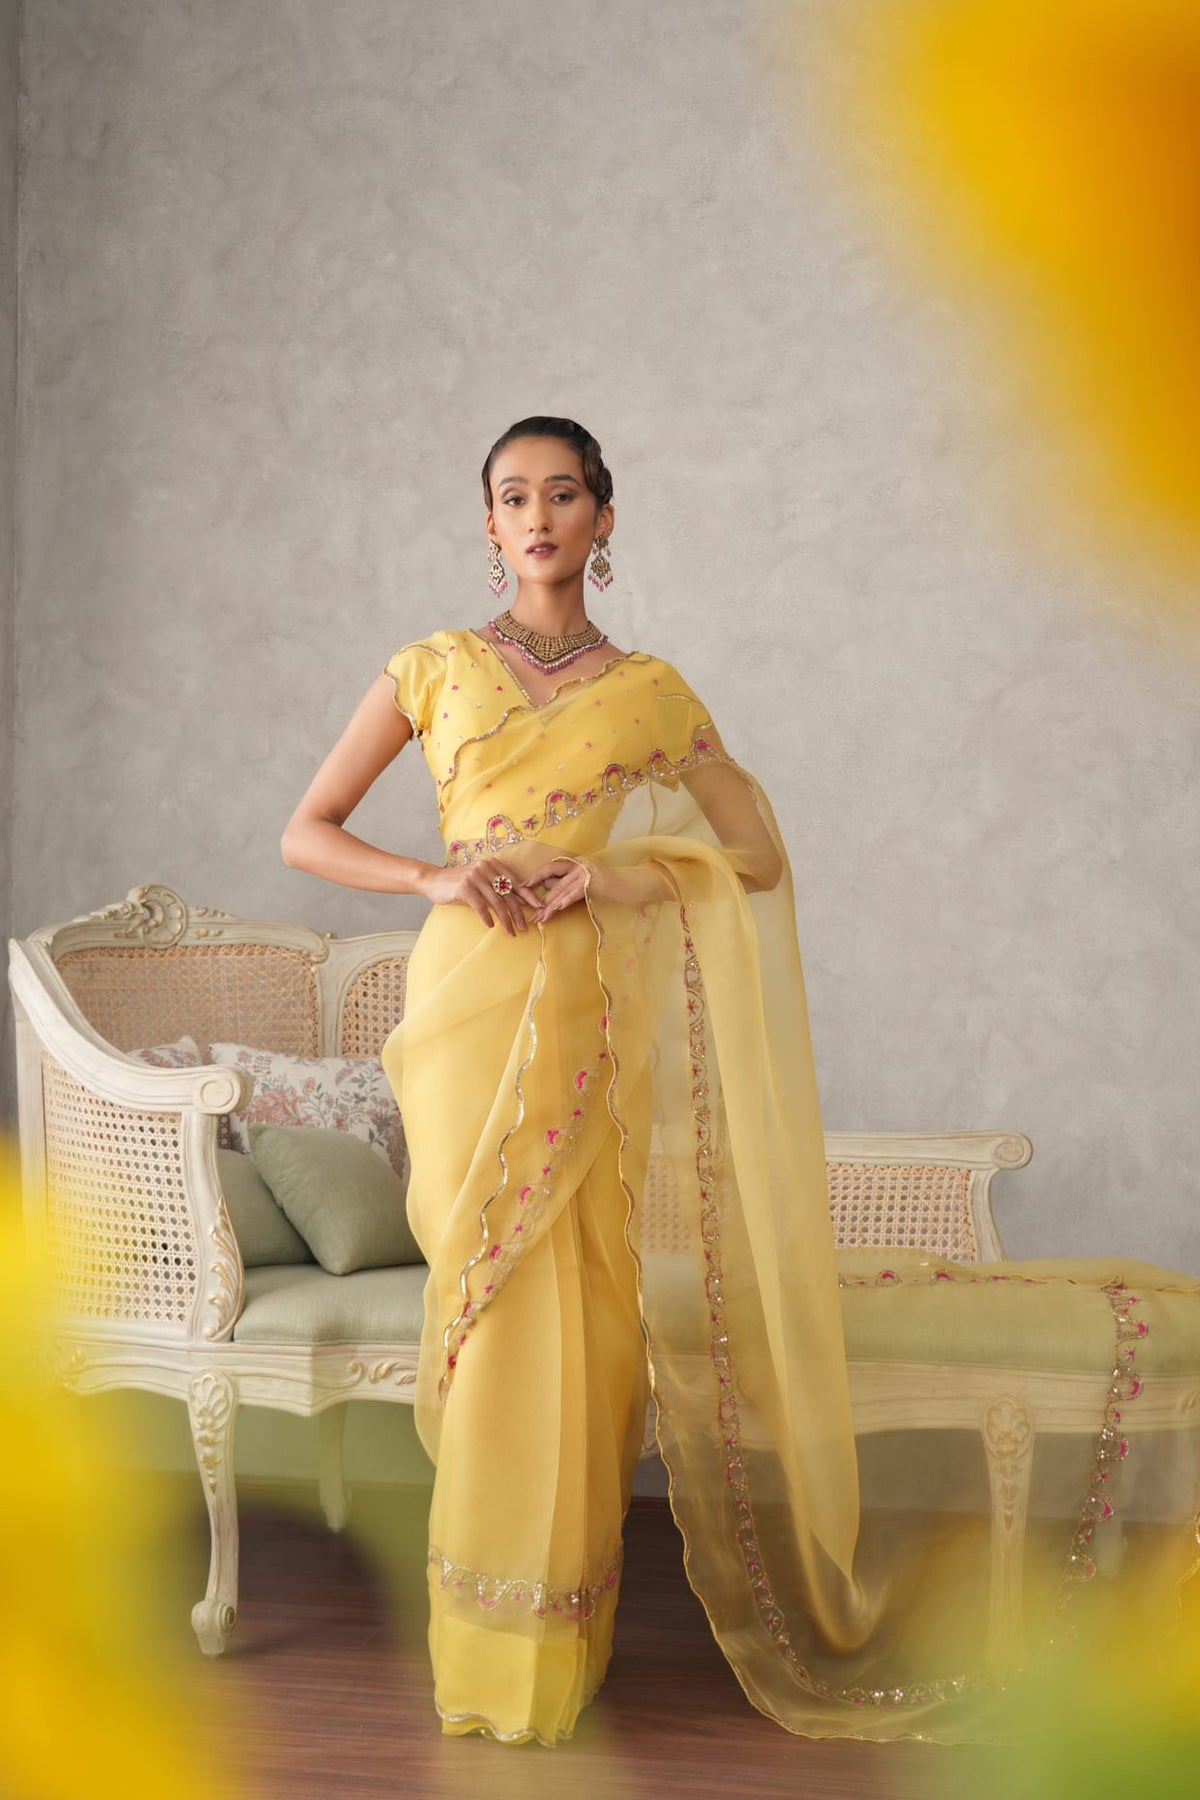 Buttercup yellow organza saree with scalloped edging and embroidered border - Sohni